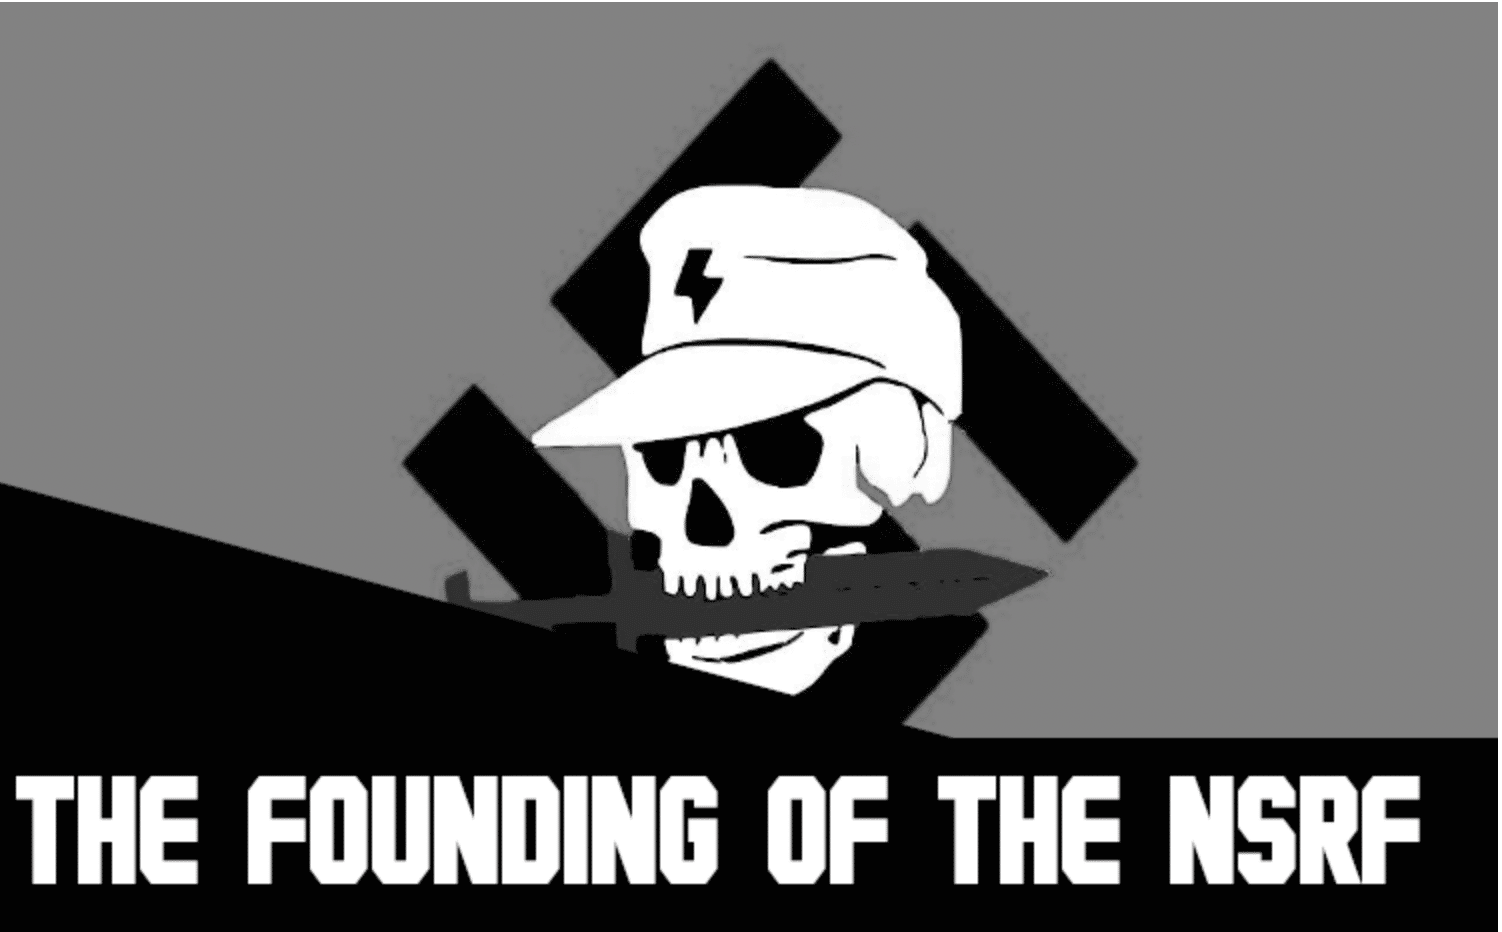 National Socialist Order (NSO) Announce Formation of Paramilitary Wing 'National Socialist Resistance Front' (NSRF) - 12 September 2022